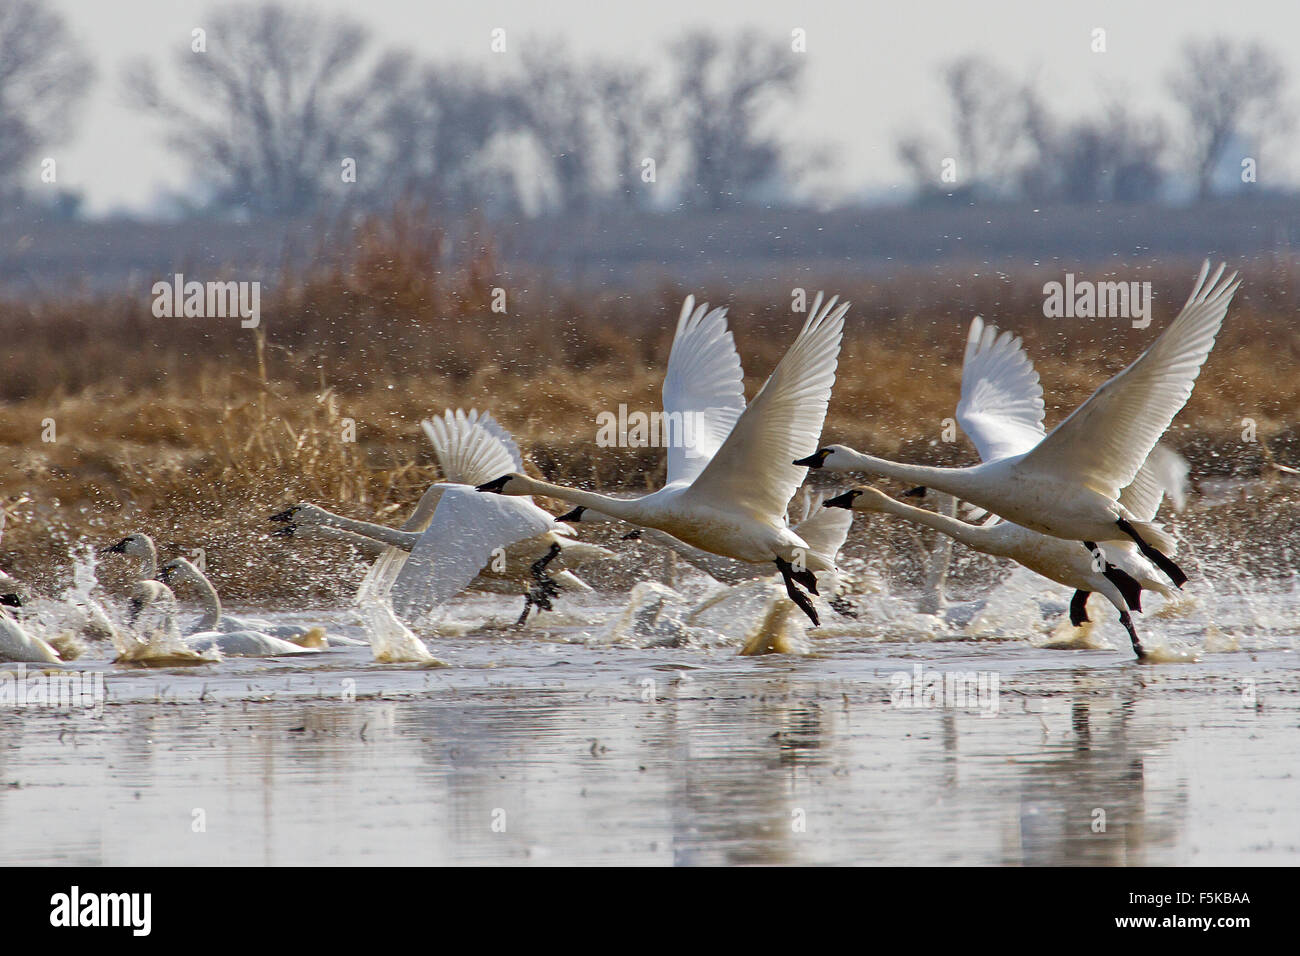 Some tundra swans take flight from a pond in Northern California. Stock Photo